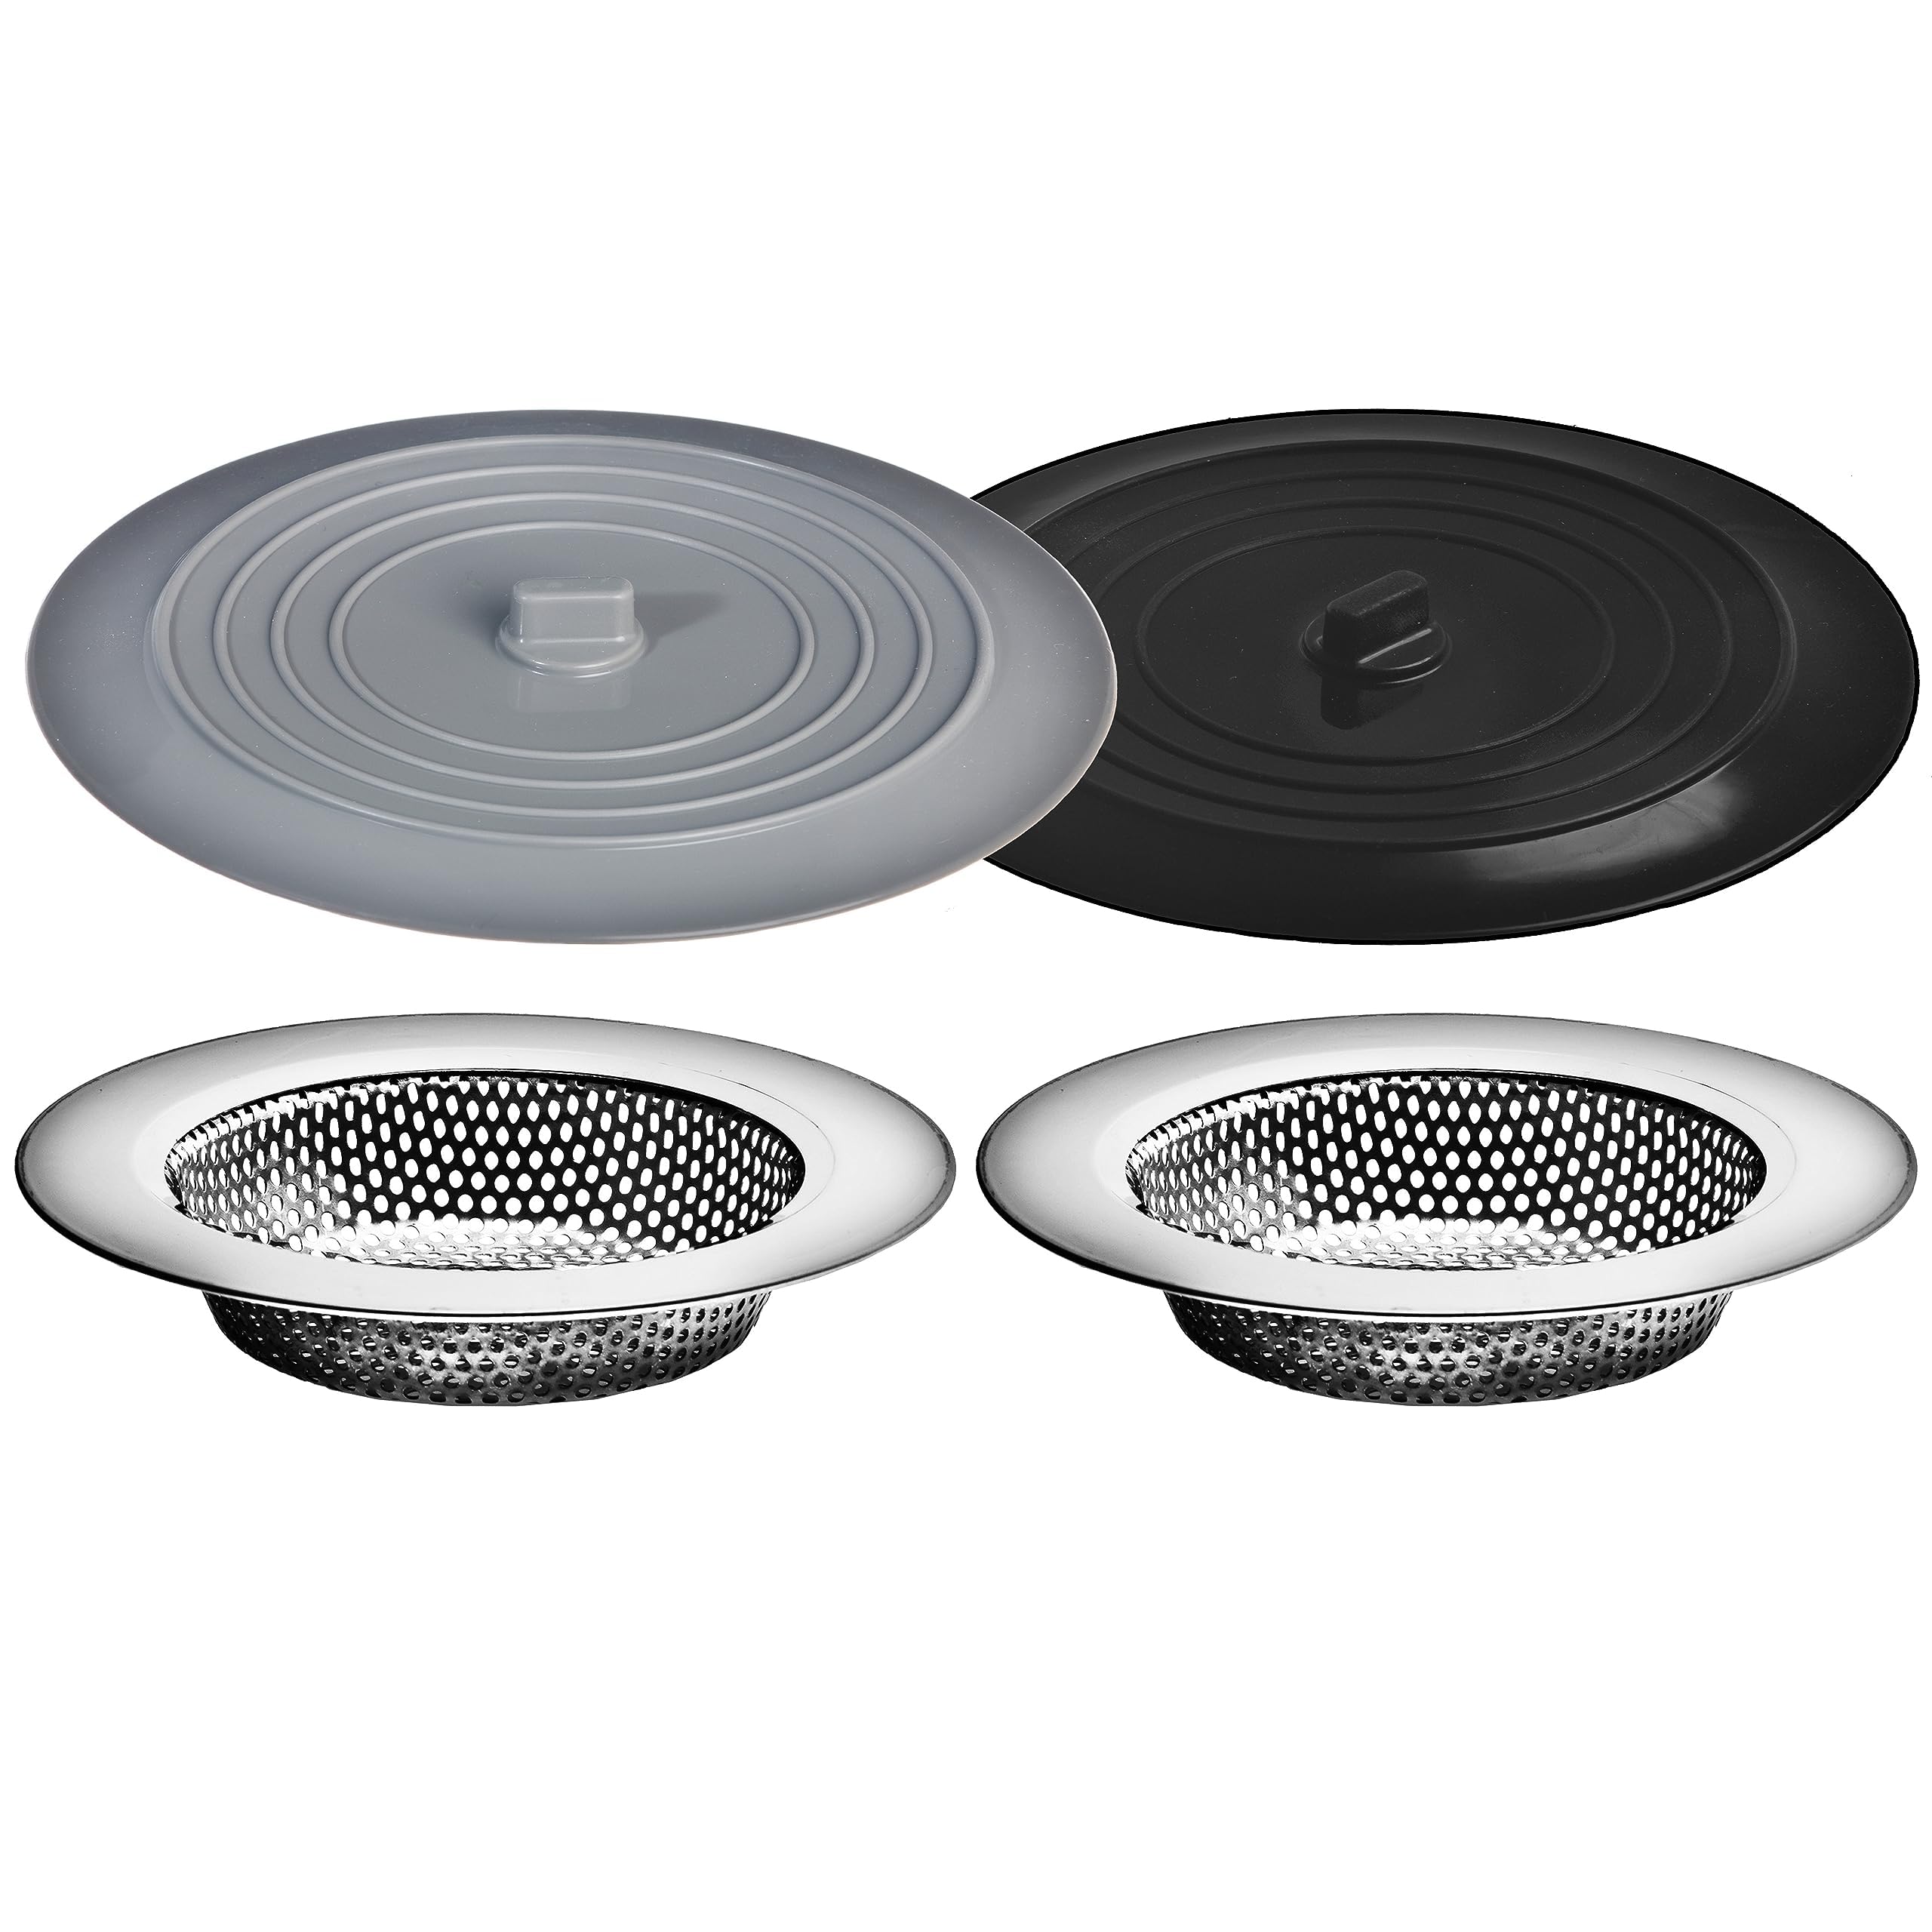 4 Pack - 4.5" Kitchen Sink Drain Strainers and 6" Kitchen Sink Stoppers Set for Standard 3-1/2 Inch Kitchen Sink Drain